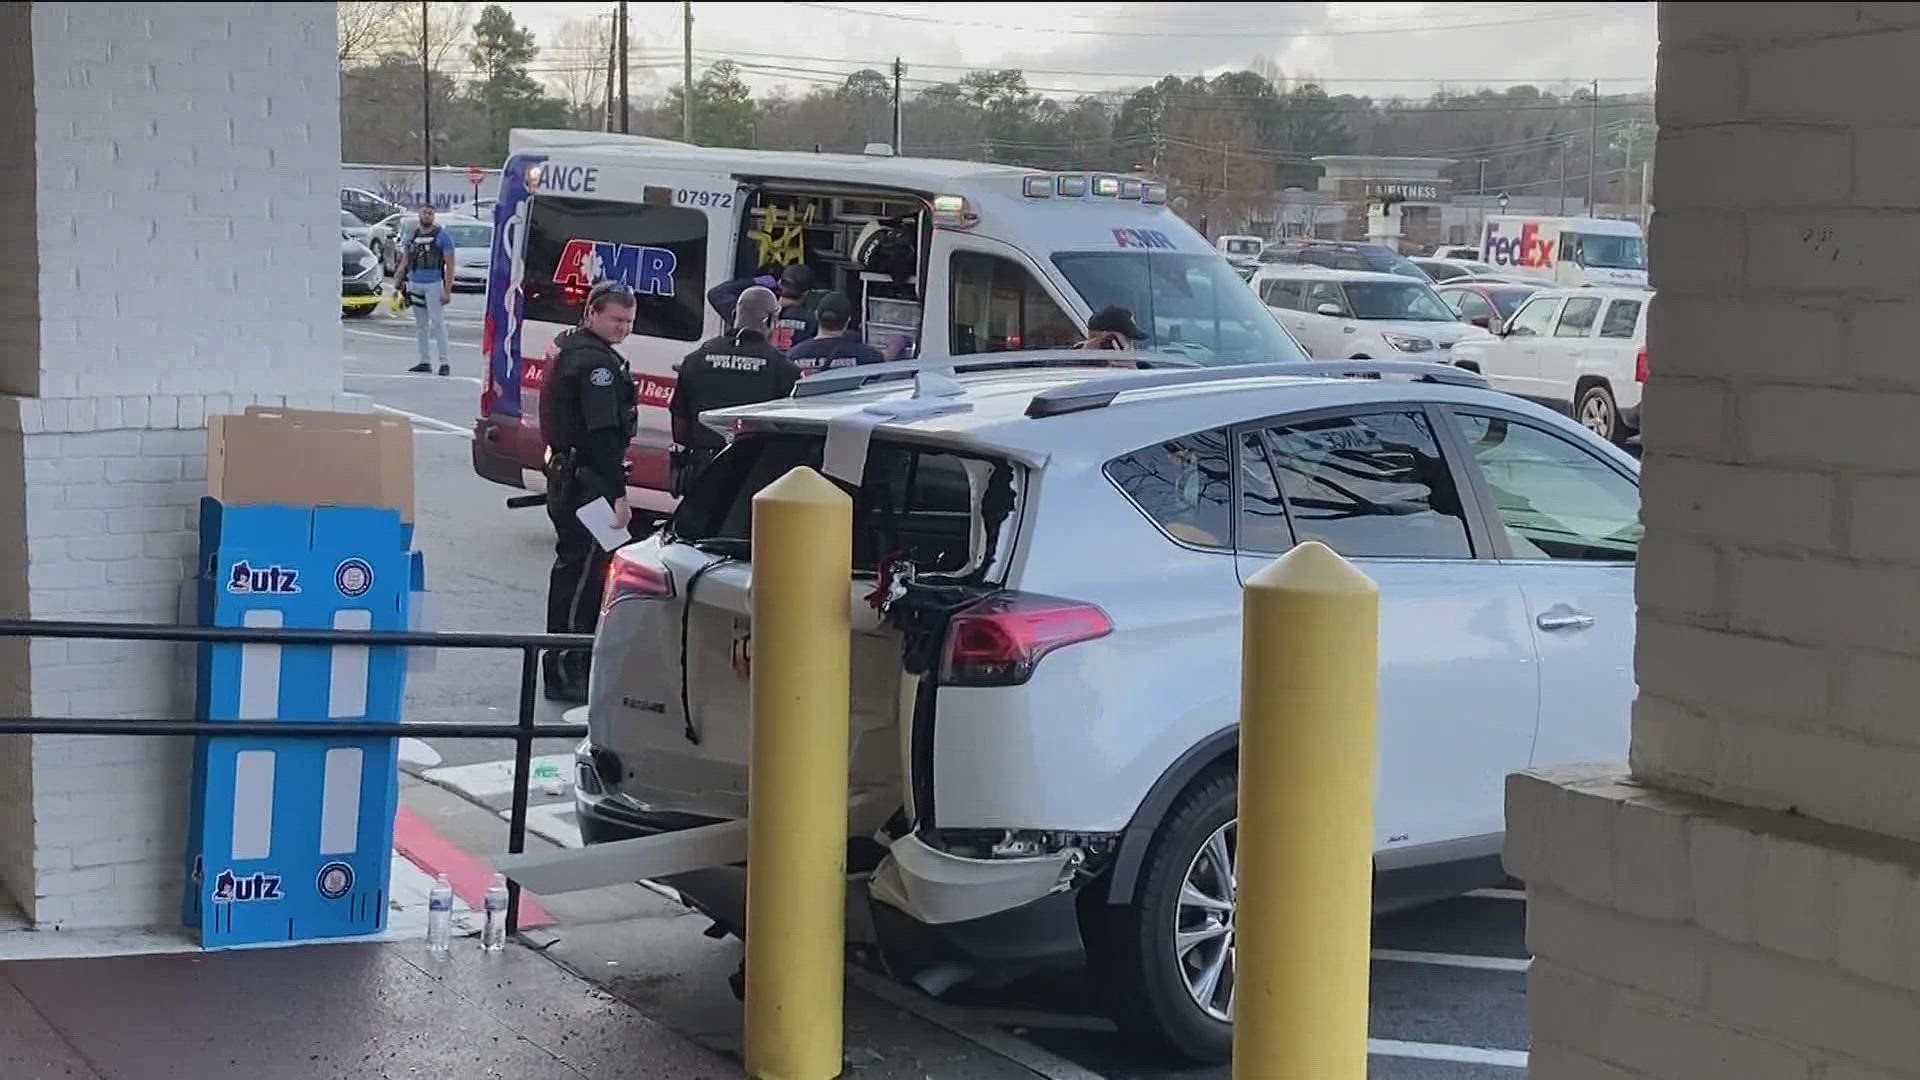 Sandy Springs Police Department was dispatched to the Publix at Abernathy Square off Rowell Road regarding an incident between a car and a pedestrian.